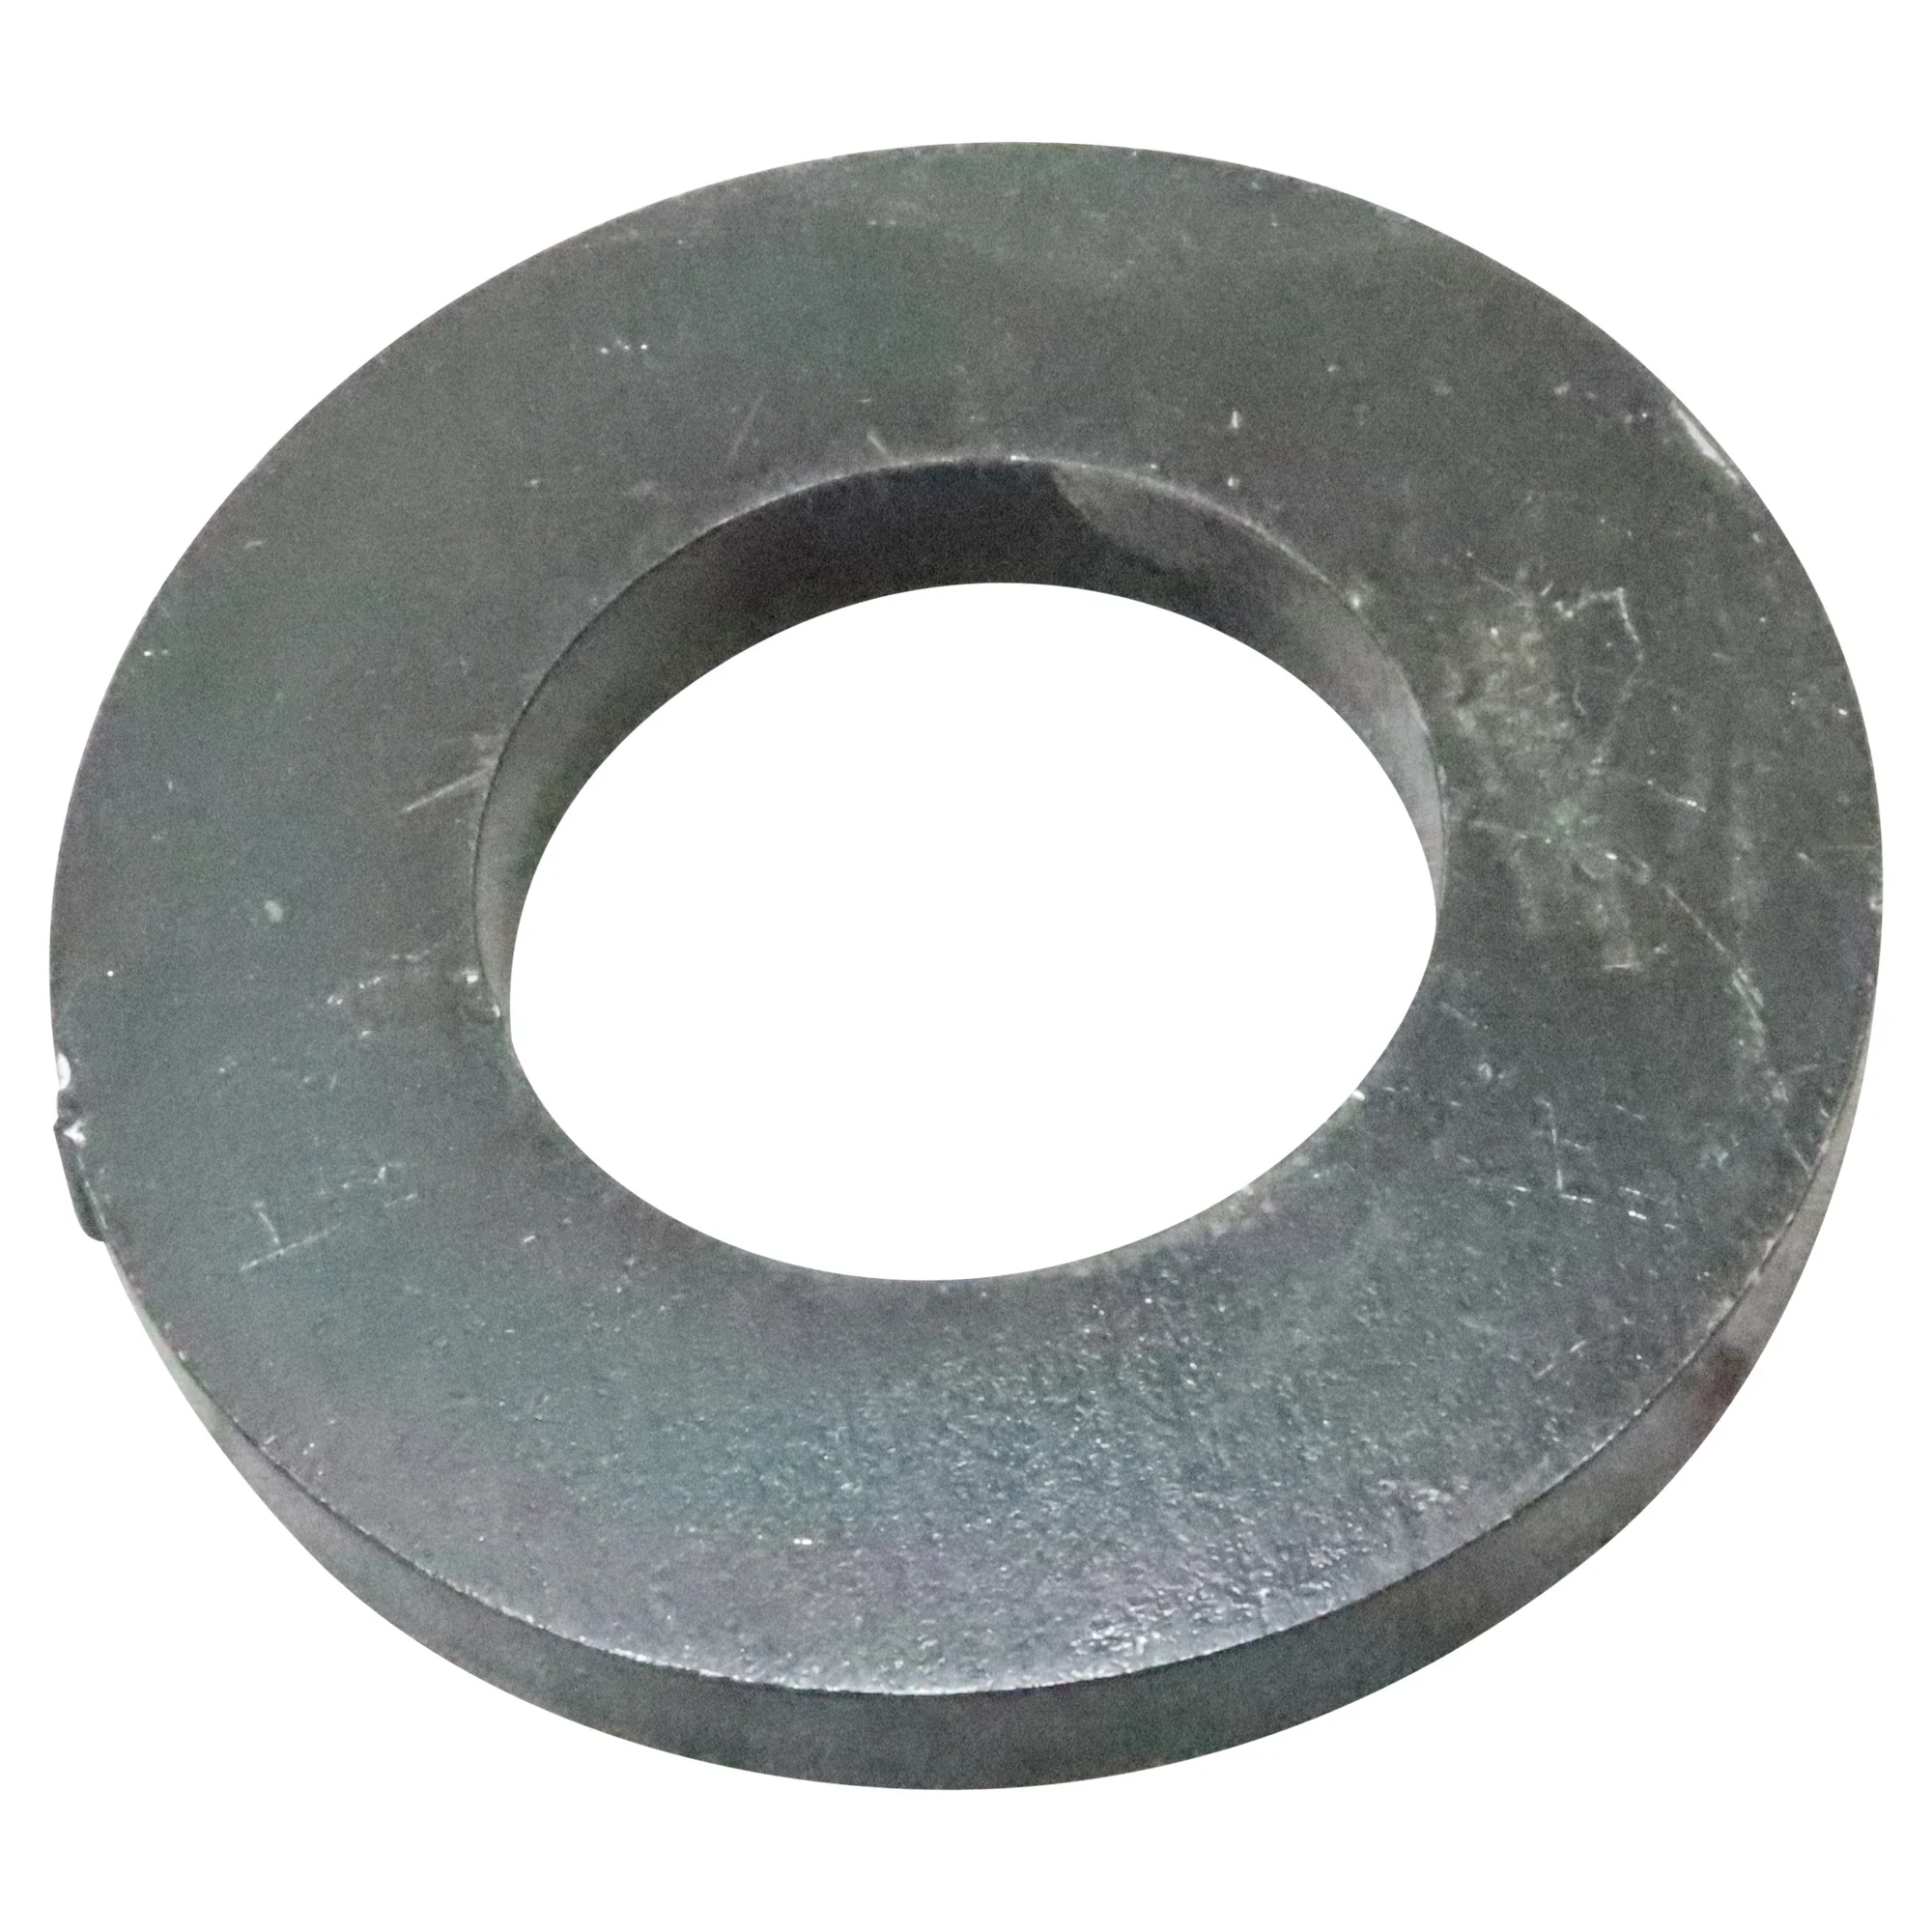 Wastebuilt® Replacement for McNeilus Spacer, Roller